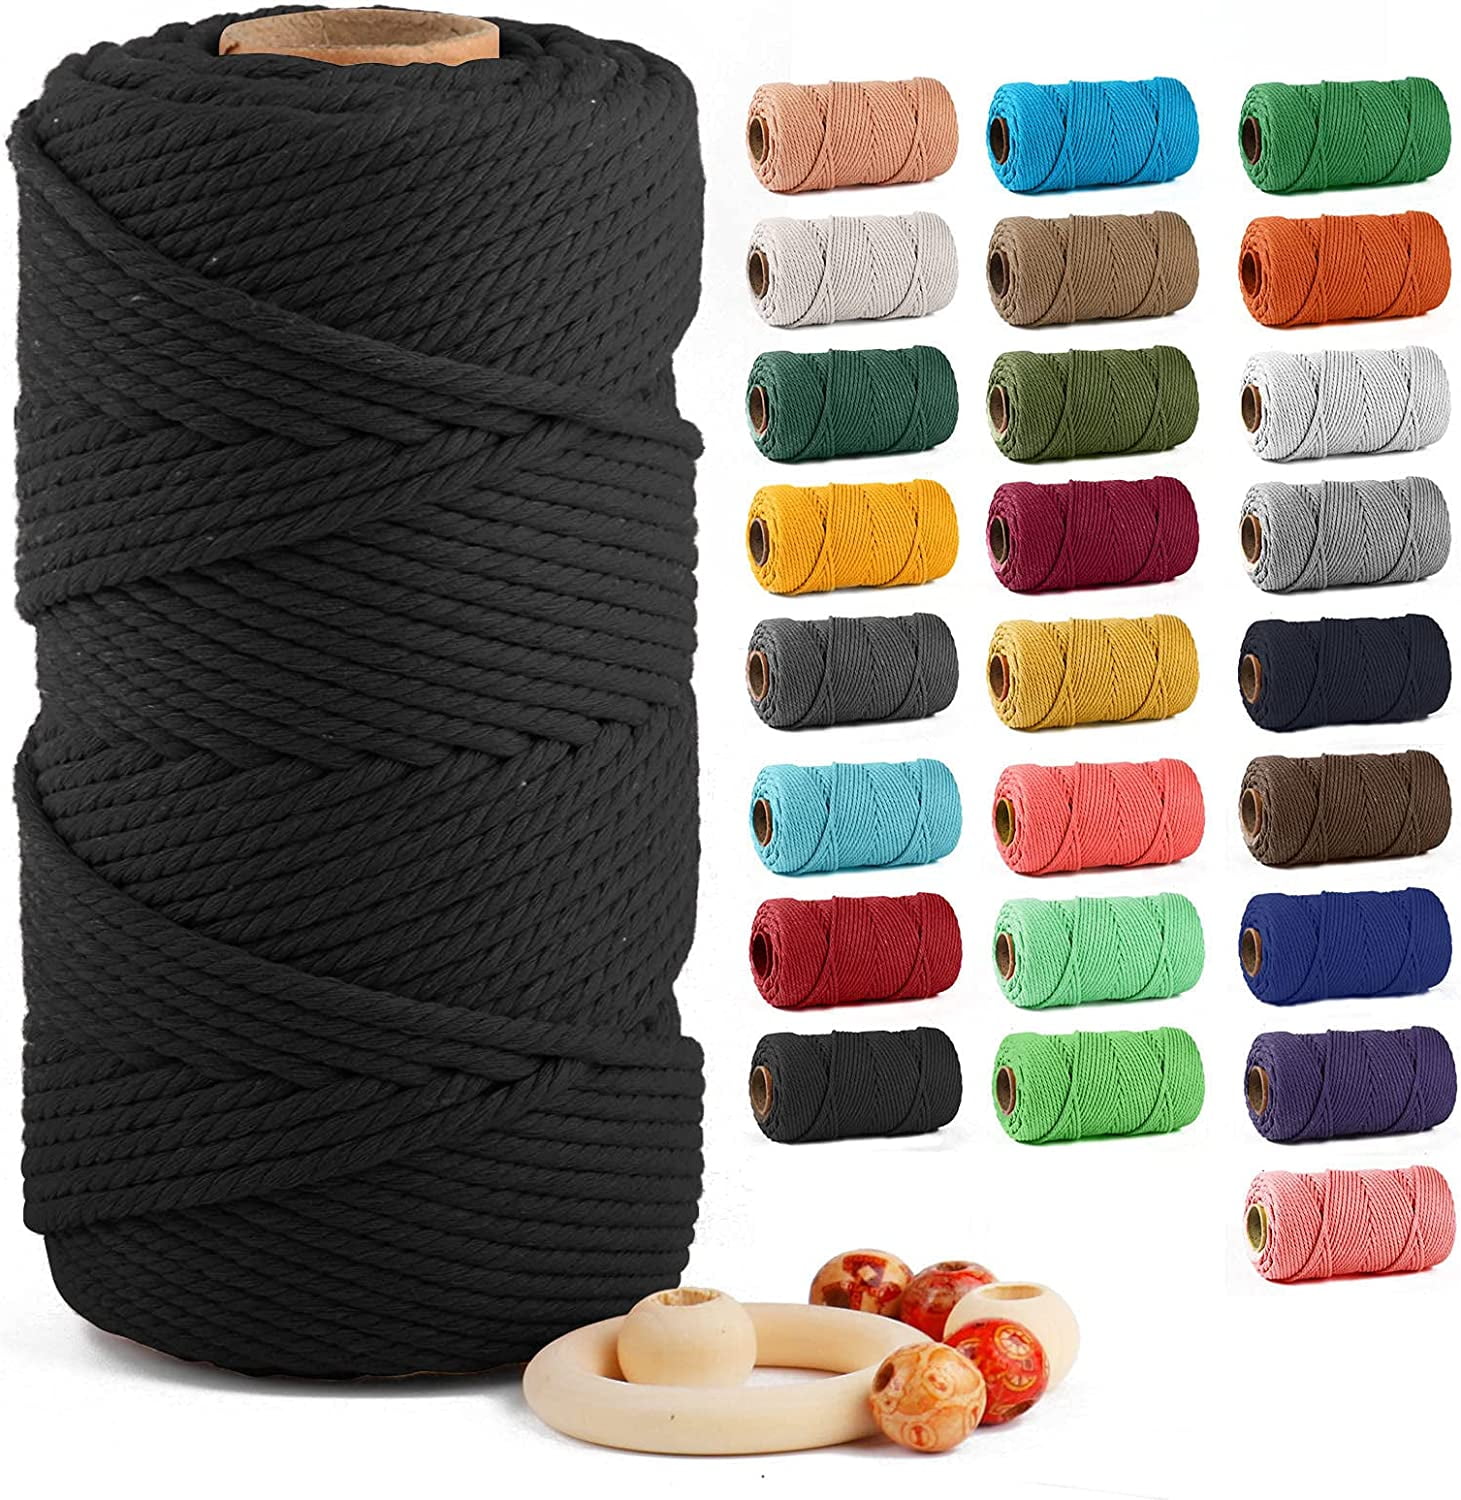 Macrame Cotton Cord 5mm x 109 Yards, ZUEXT 100% Natural Handmade Colorful 4  Strands Twisted Braided Cotton Rope for Wall Hanging Plant Hangers Gift  Wrapping Tapestry DIY Crafts(100m, ArmyGreen) 